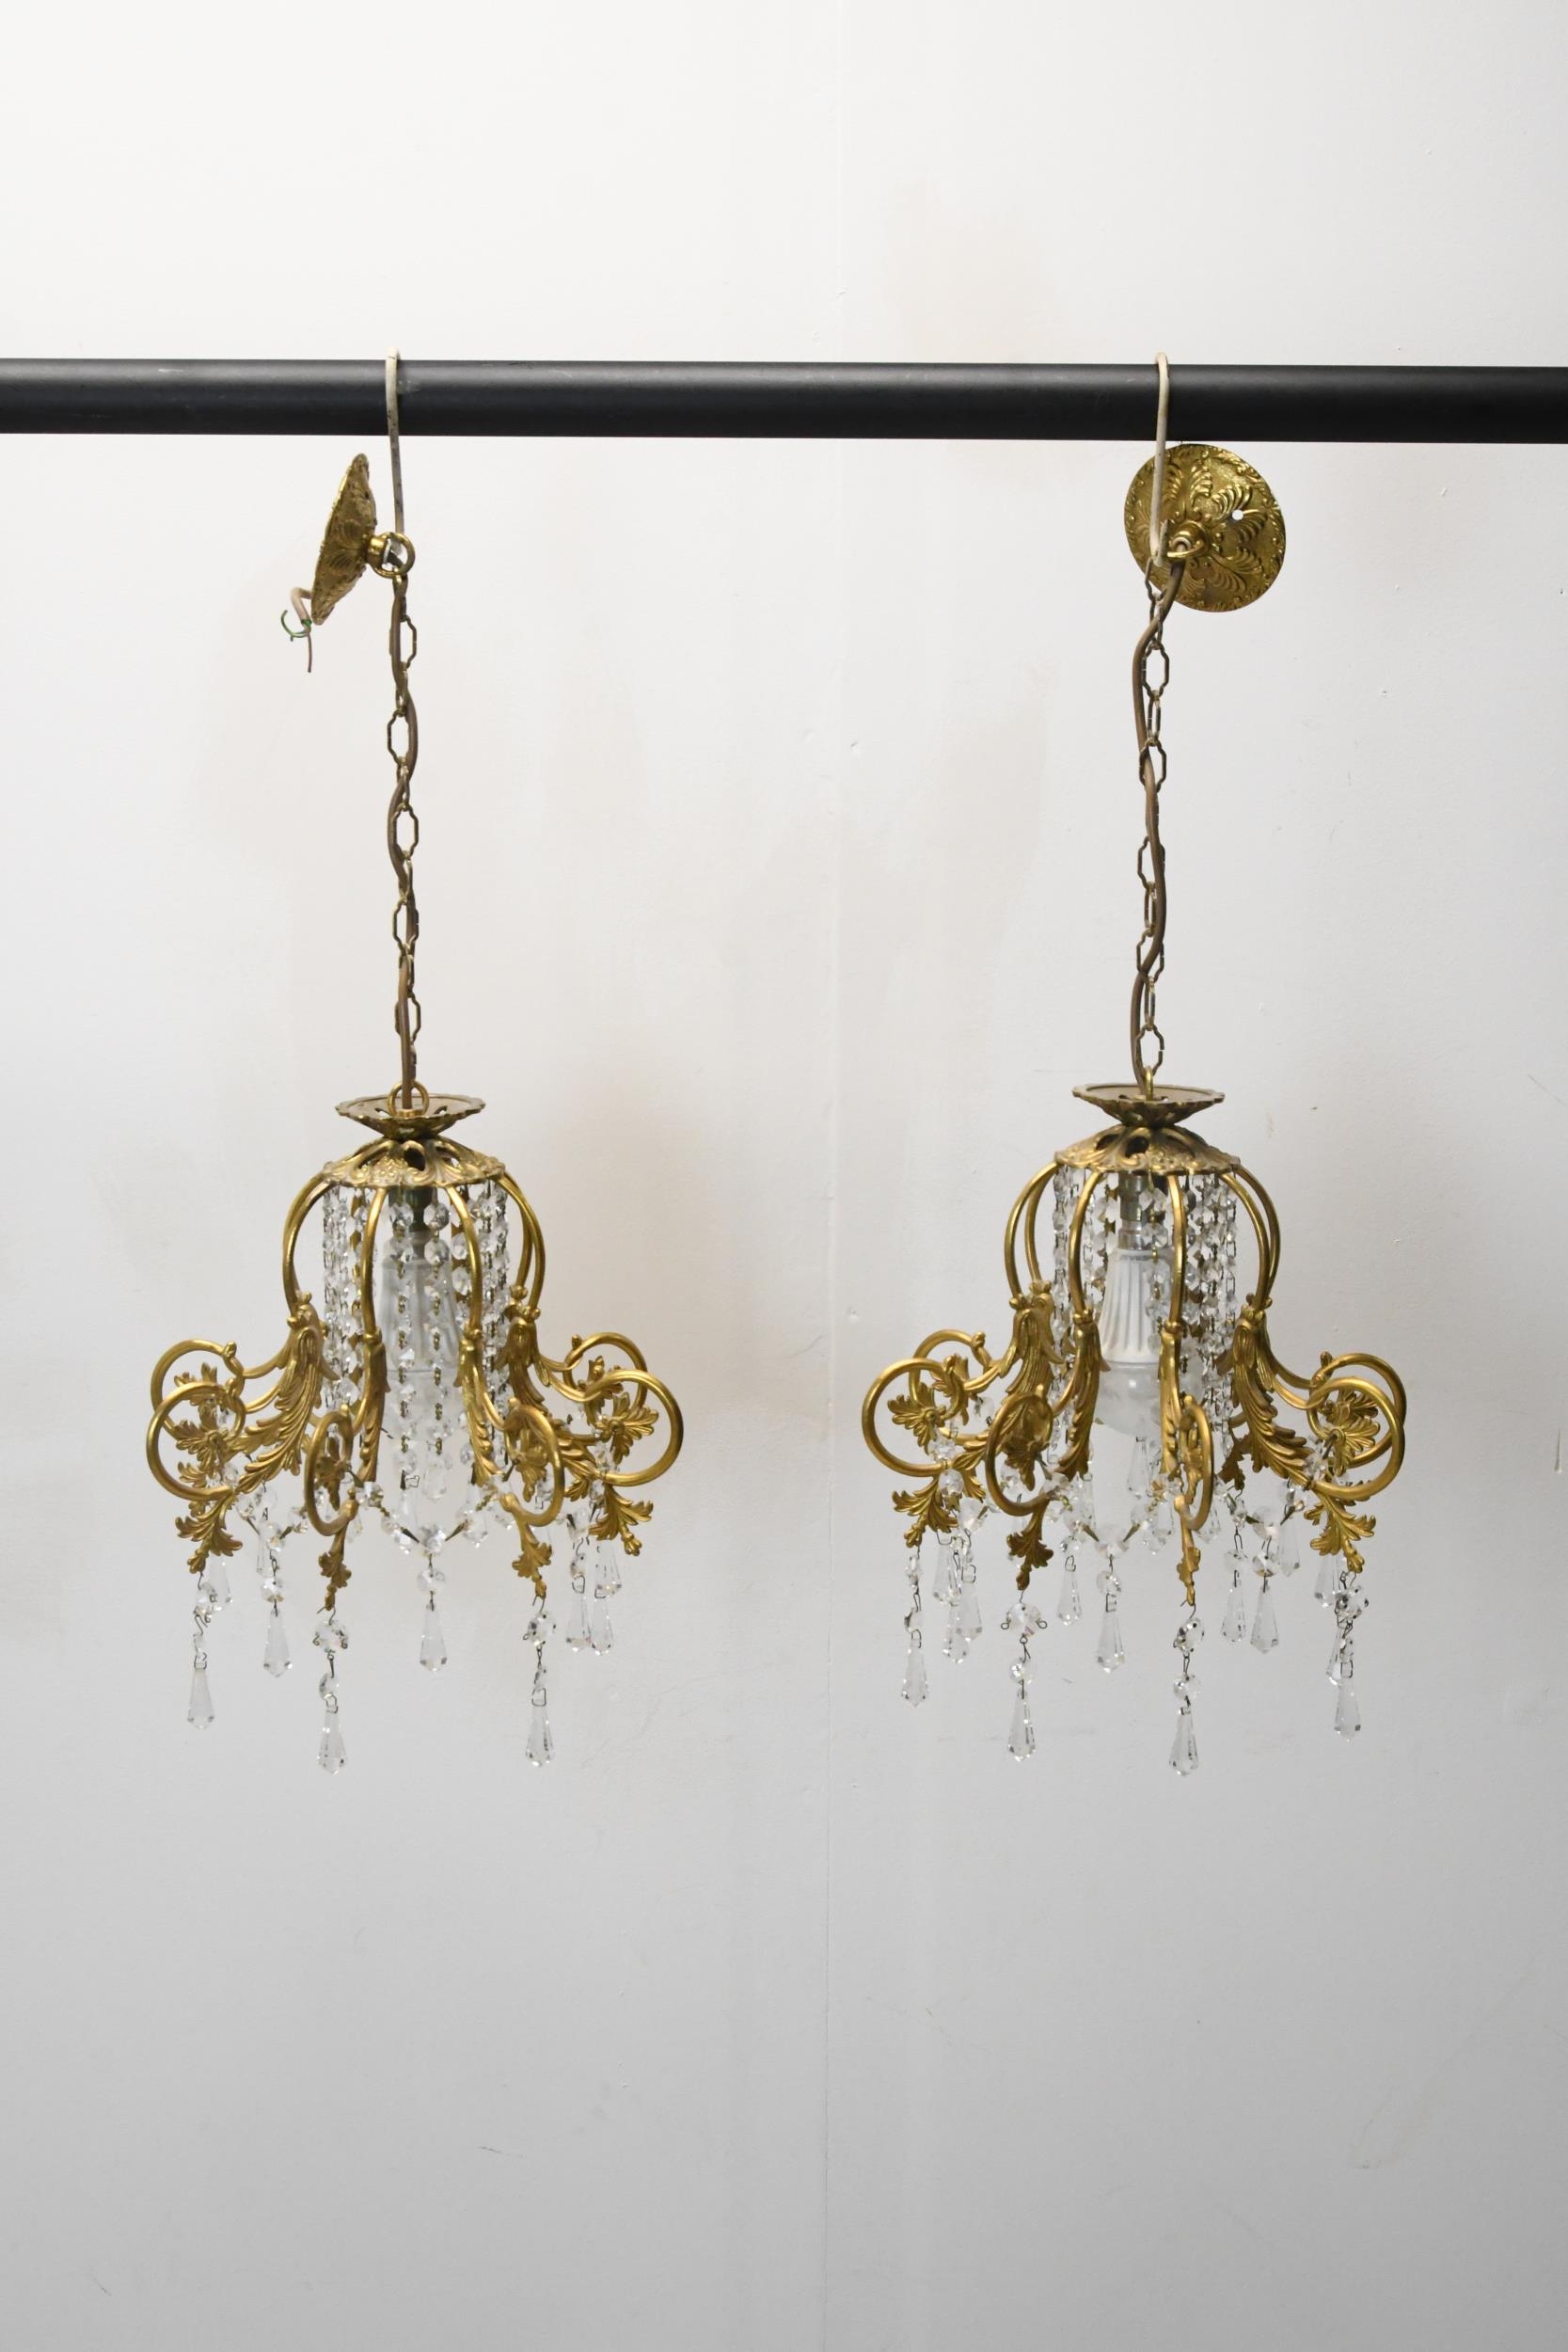 A pair of hanging ceiling lights with scrolling gilt metal frames and crystal drops. H.62 W.30 - Image 2 of 3